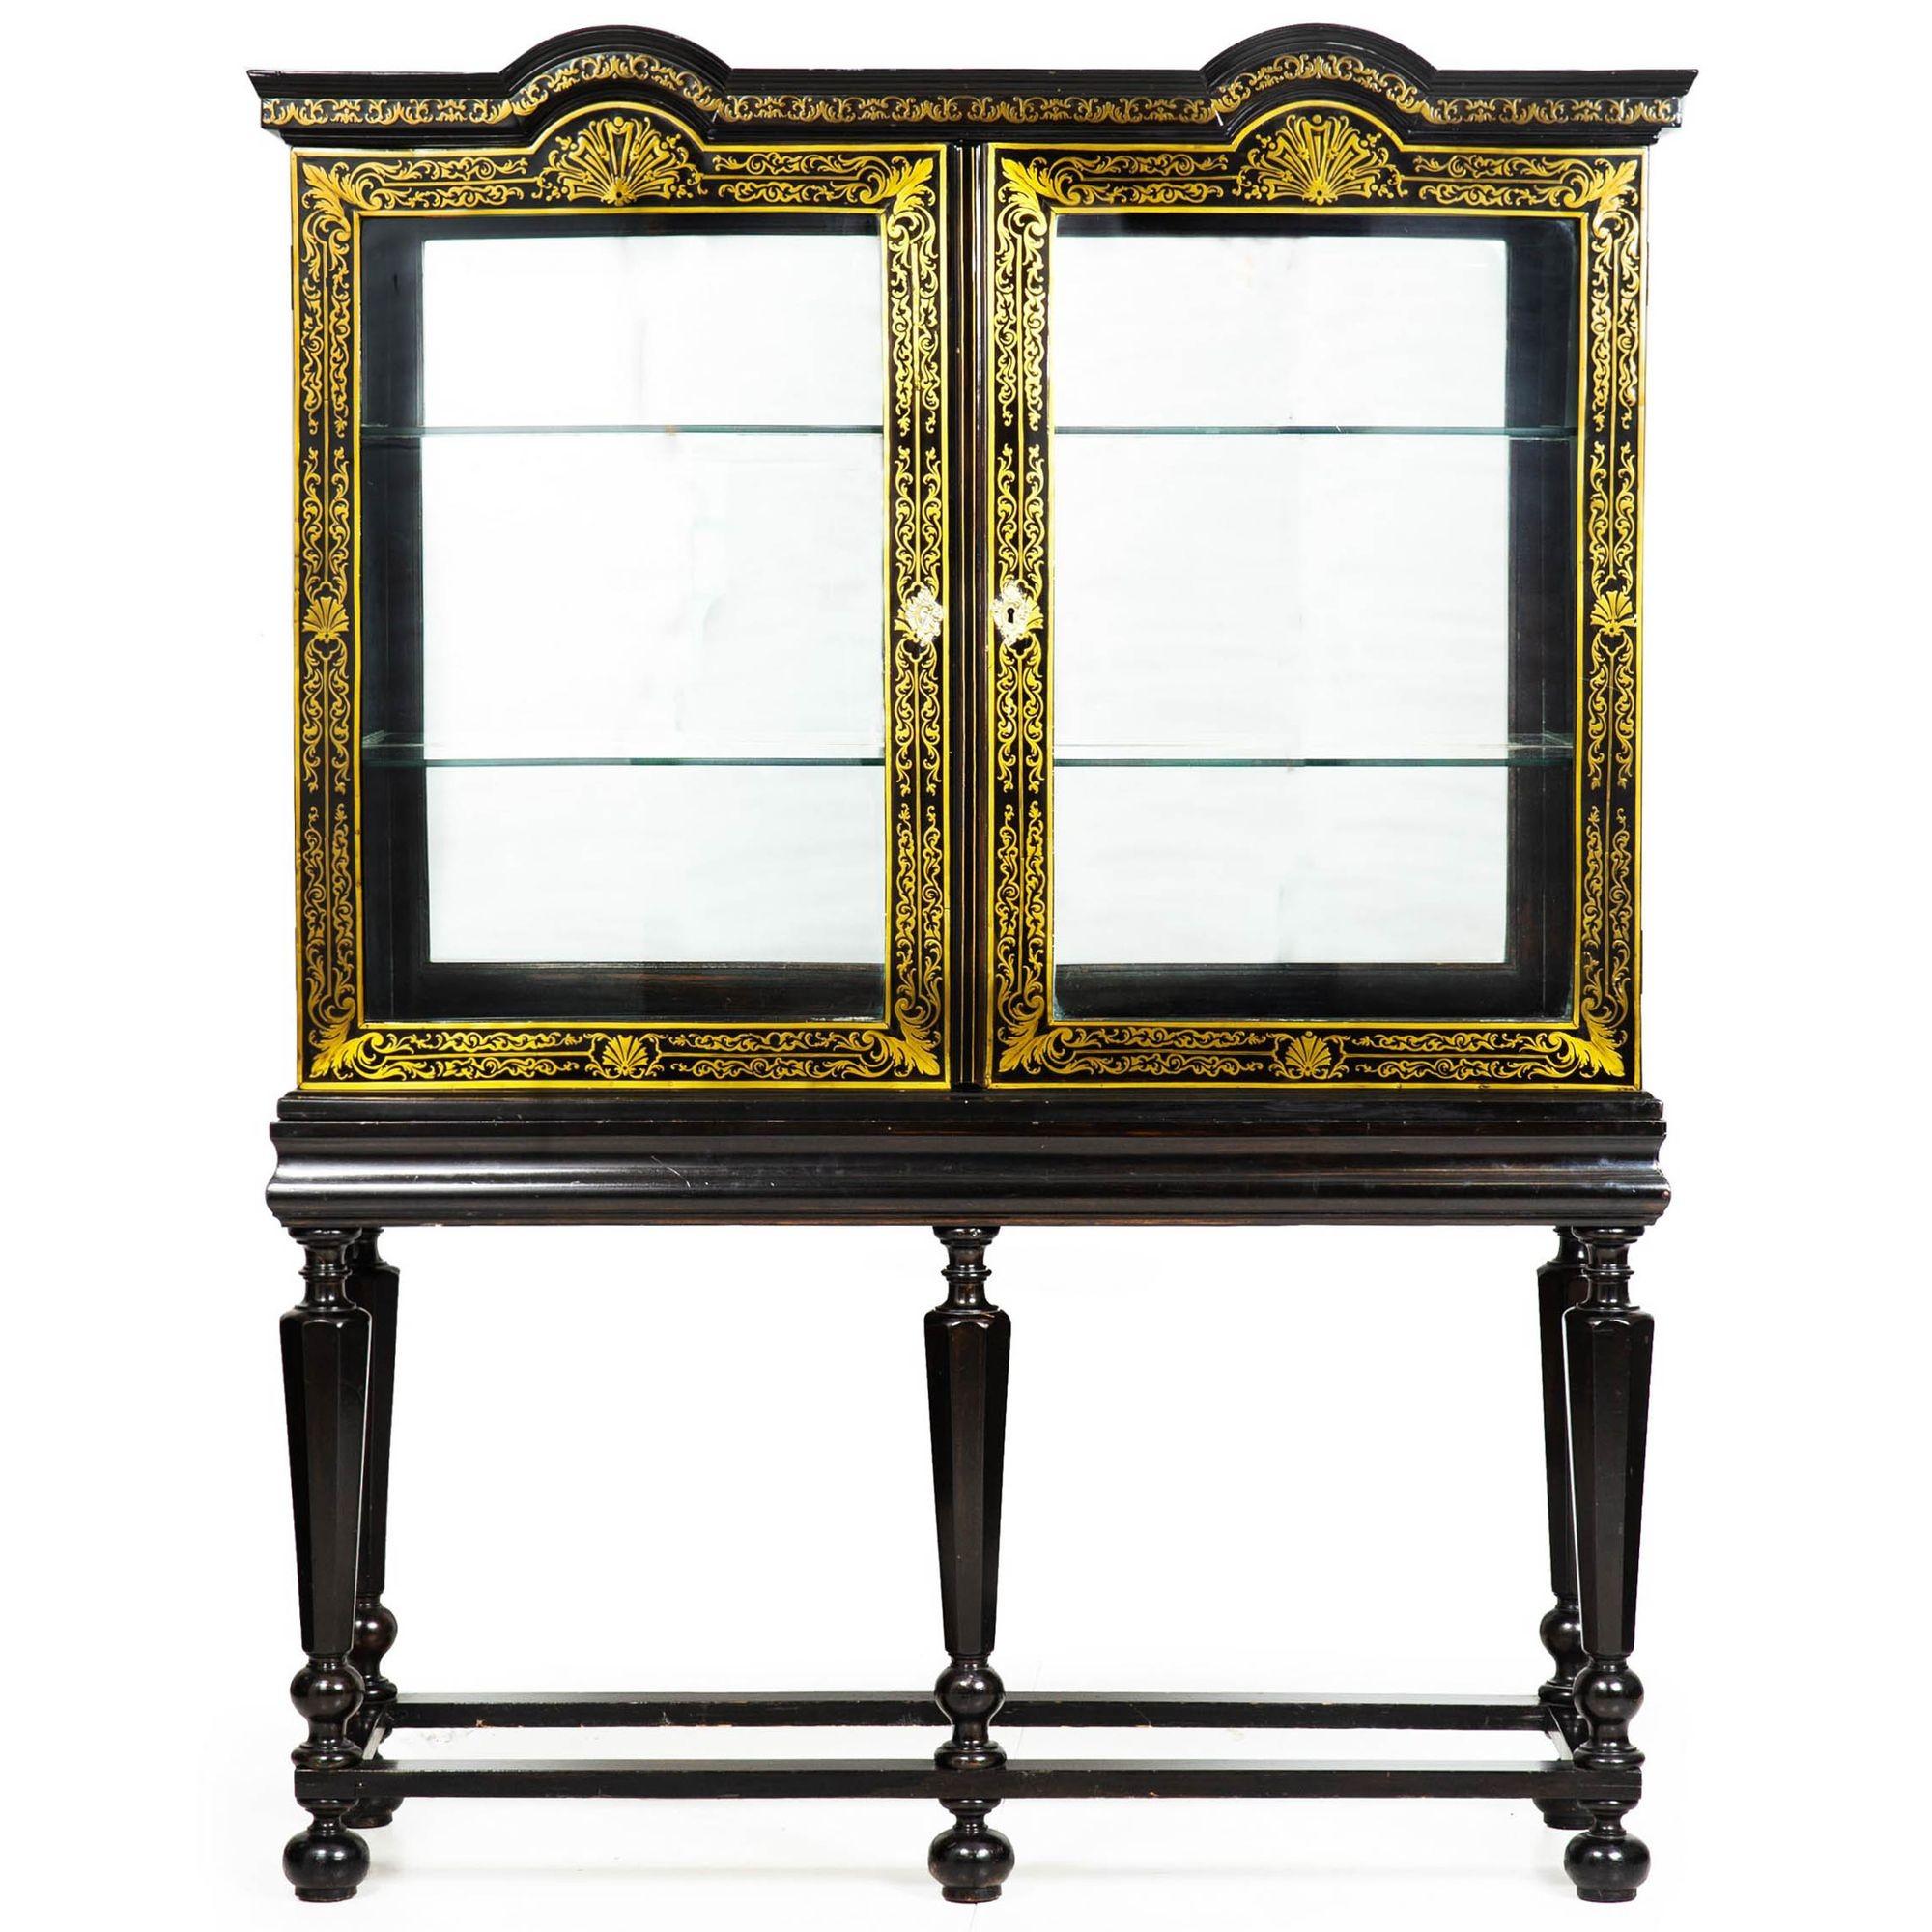 LOUIS XIV EBONIZED AND BRASS-INLAID DISPLAY CABINET ON STAND
France  upper portion composed of 18th century materials, stand crafted of 19th century materials, interior covered with mirrored glass in the 20th century
Item # 309GPP22W

An incredibly